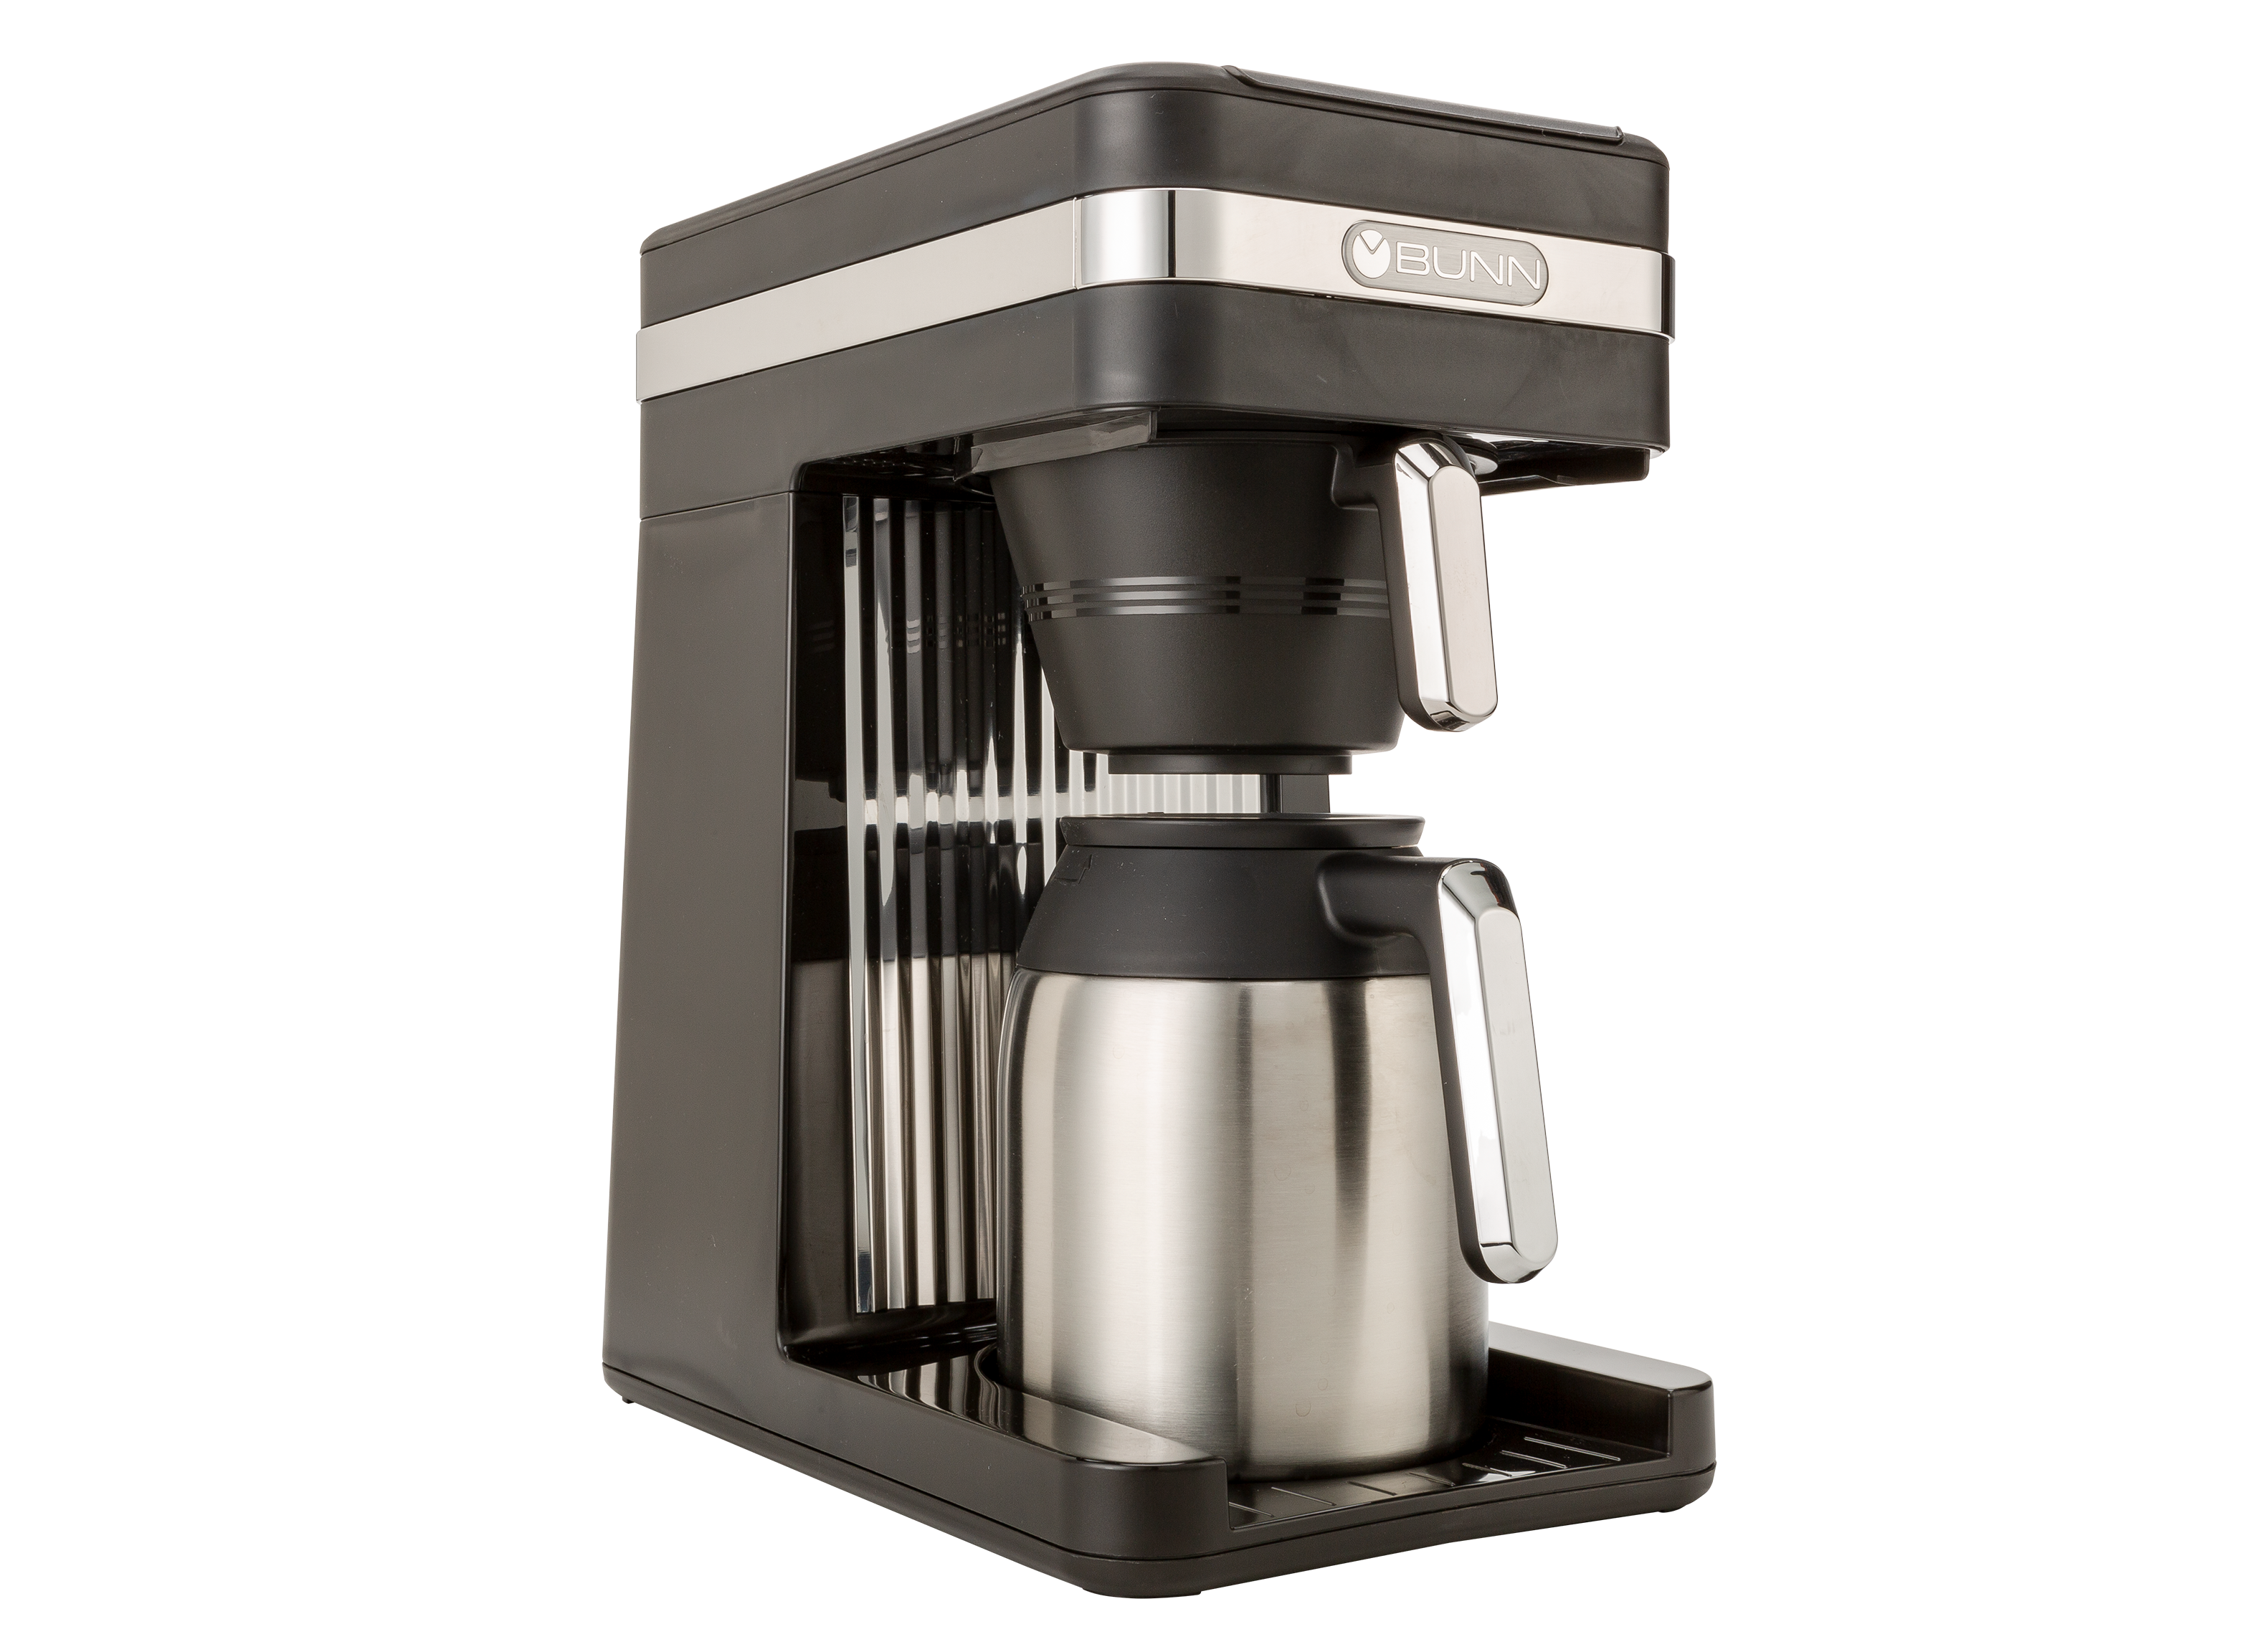 https://crdms.images.consumerreports.org/prod/products/cr/models/400239-drip-coffee-makers-with-carafe-bunn-csb3t-speed-brew-10010152.png